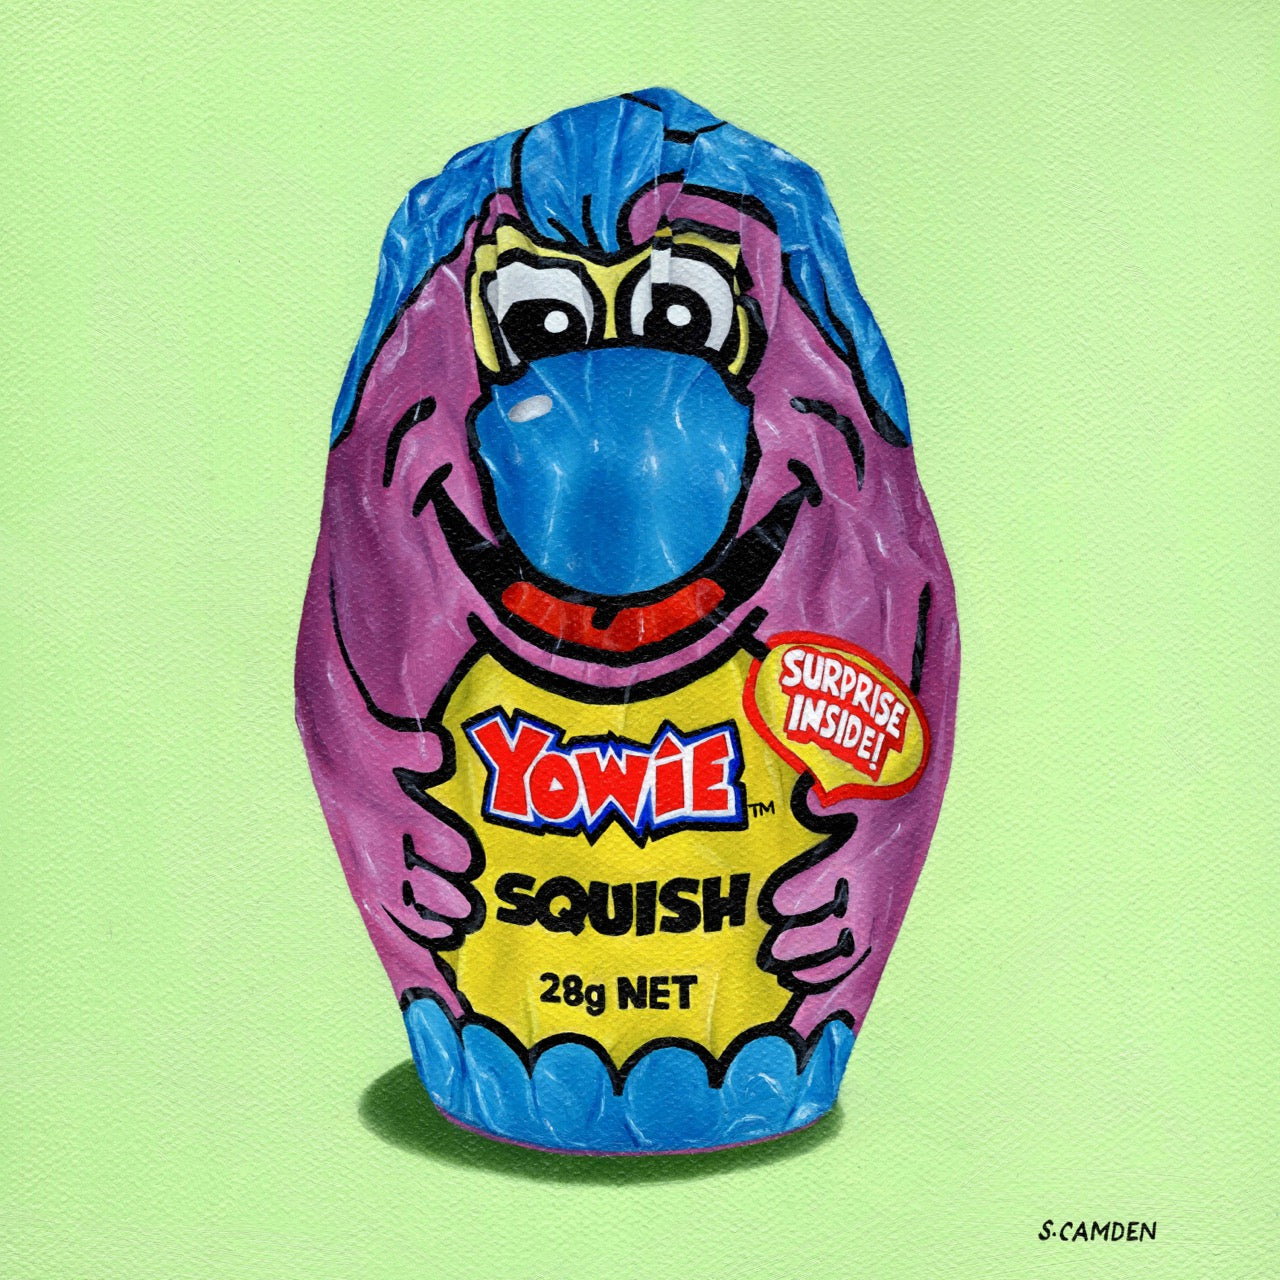 Squish the Yowie